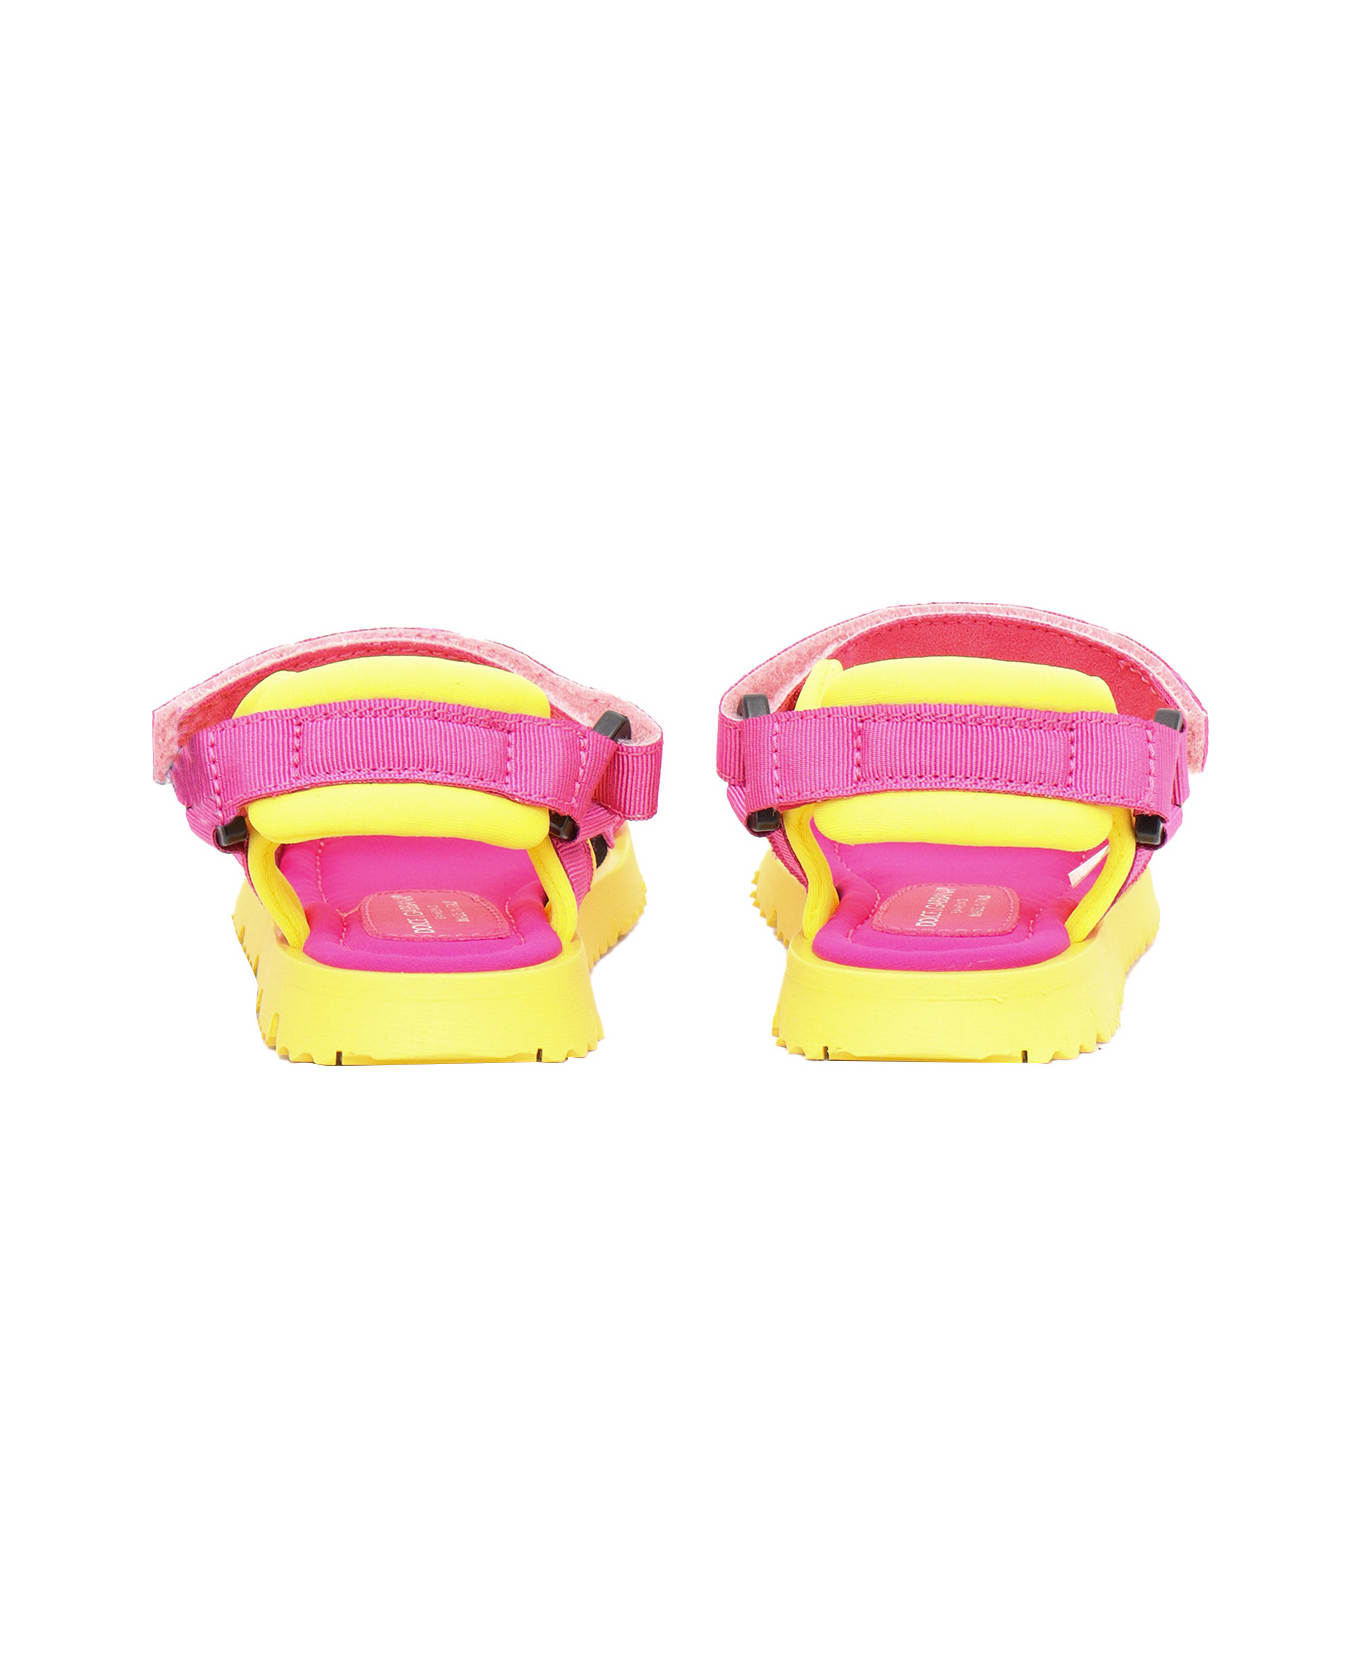 Dolce & Gabbana Pink And Yellow D&g Sandals - YELLOW シューズ